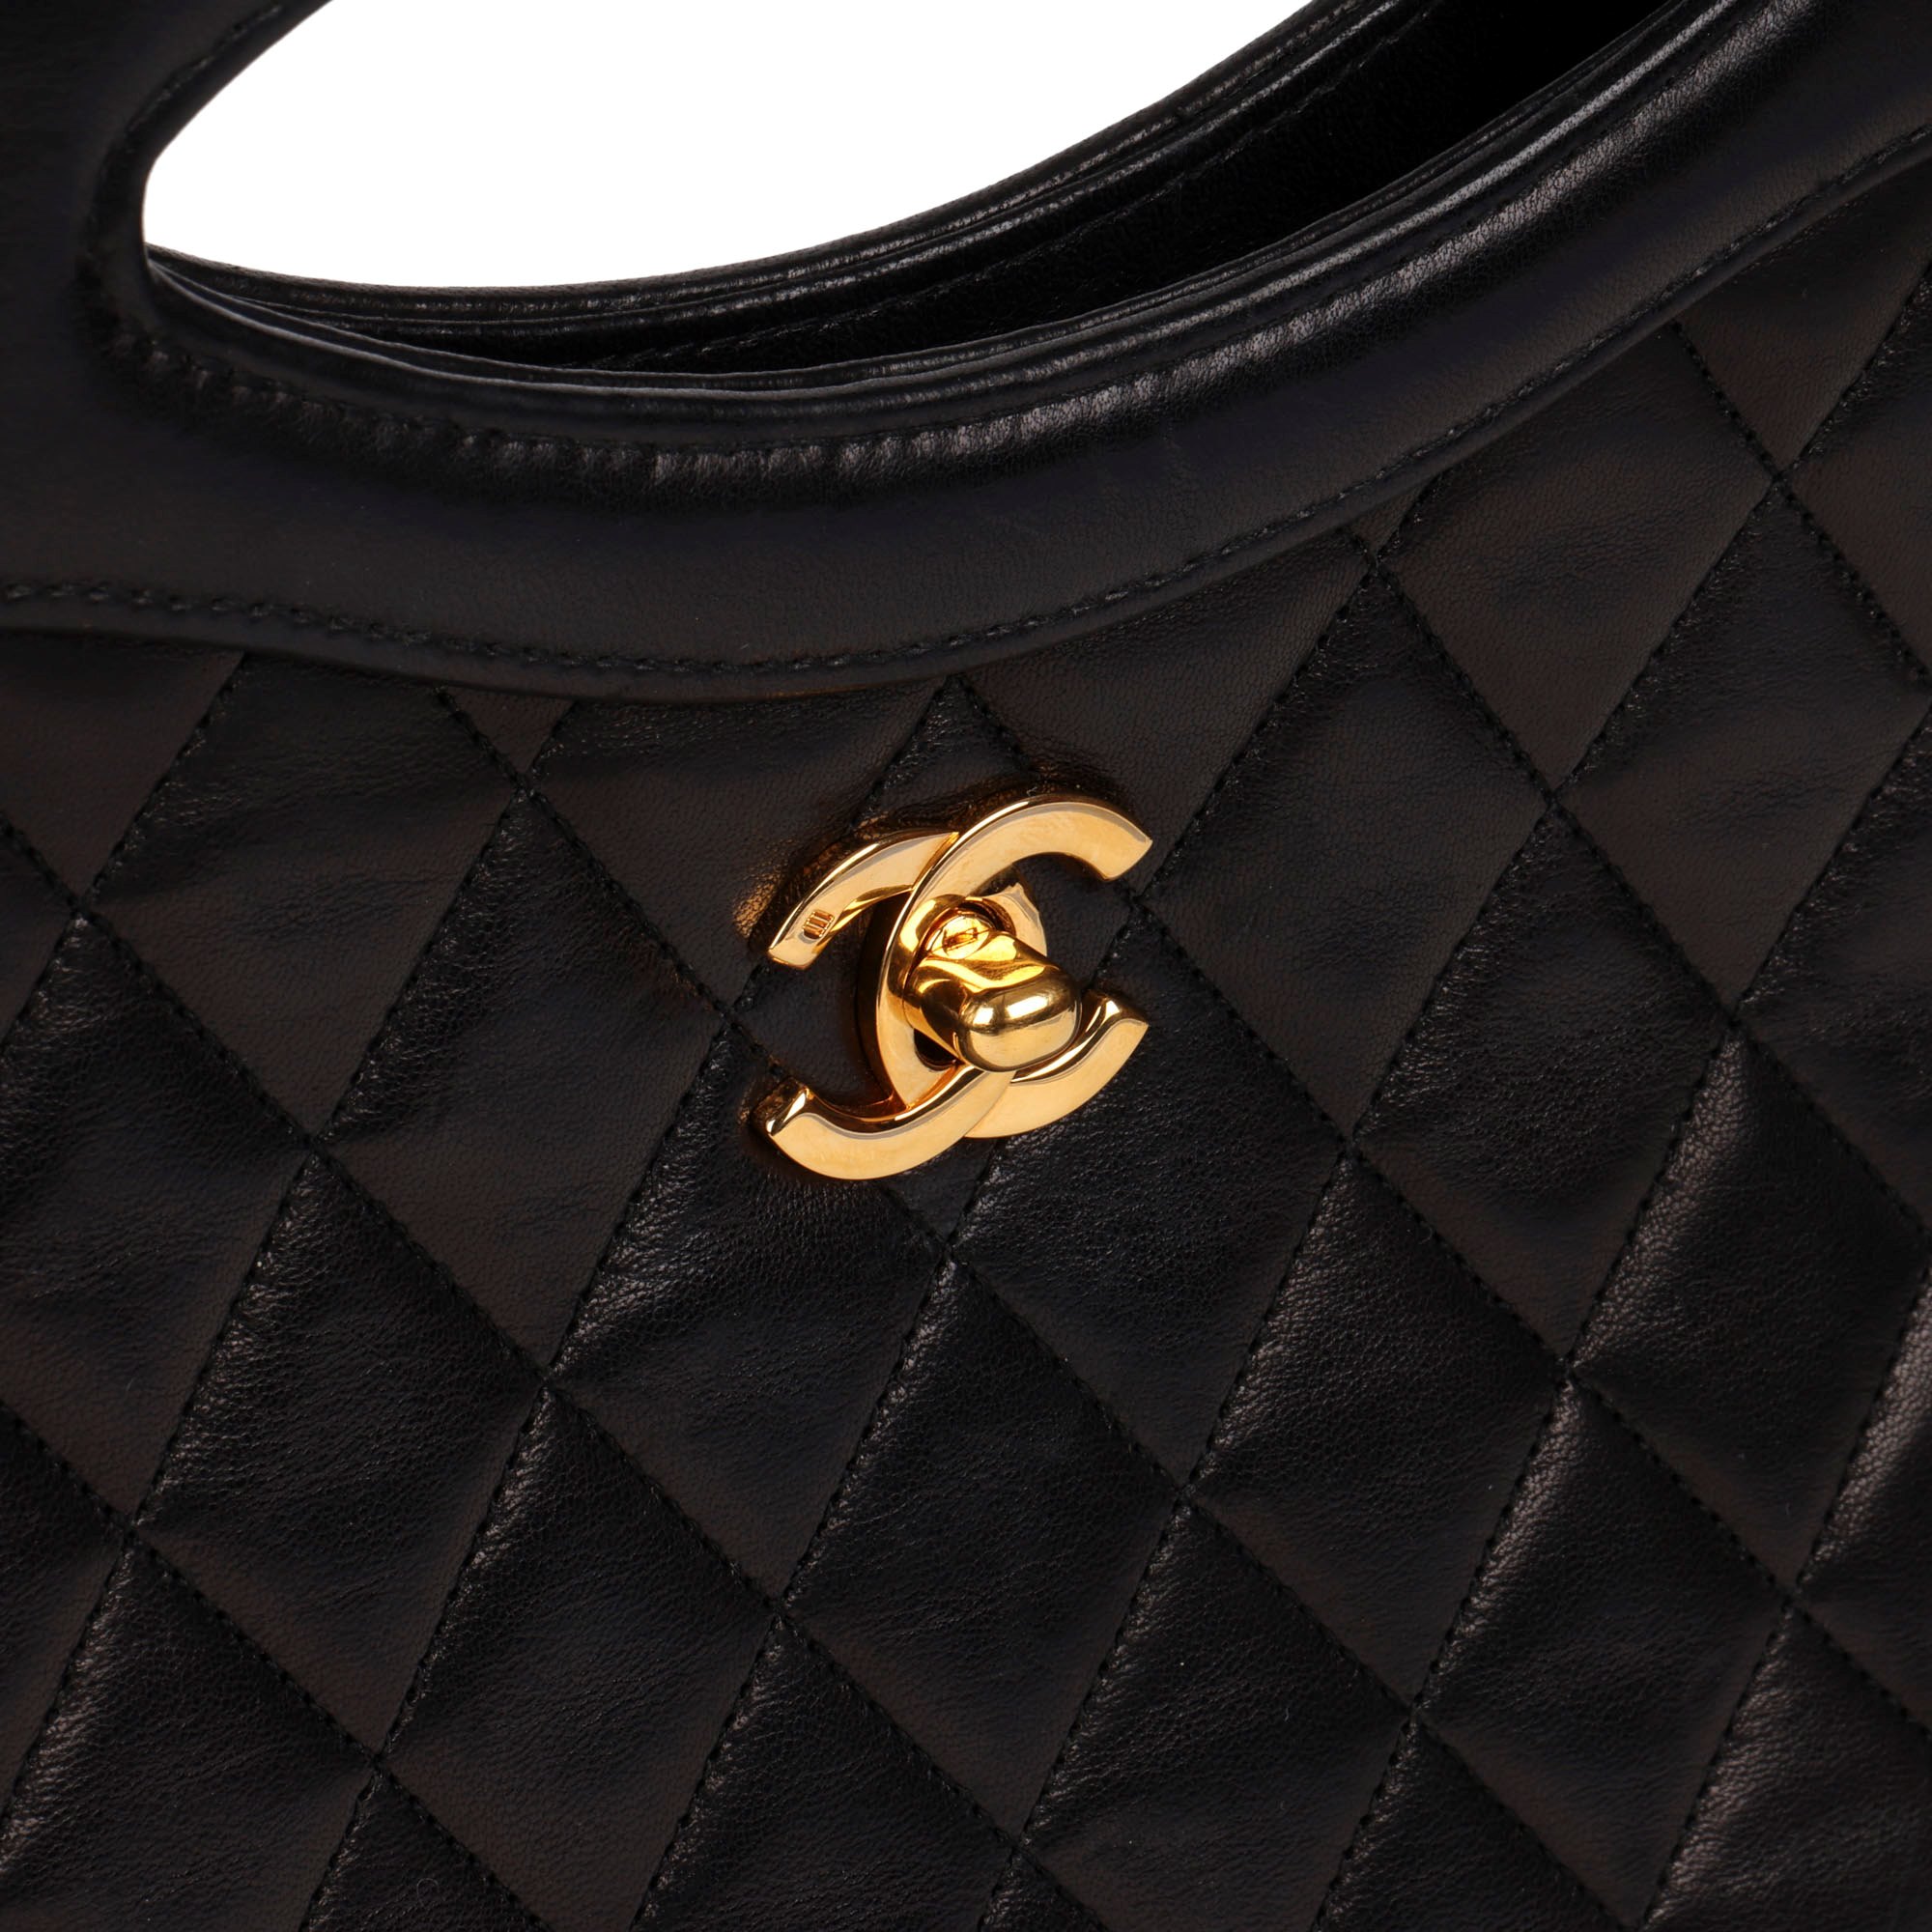 Chanel Black Quilted & Smooth Lambskin Vintage Classic Shoulder Tote